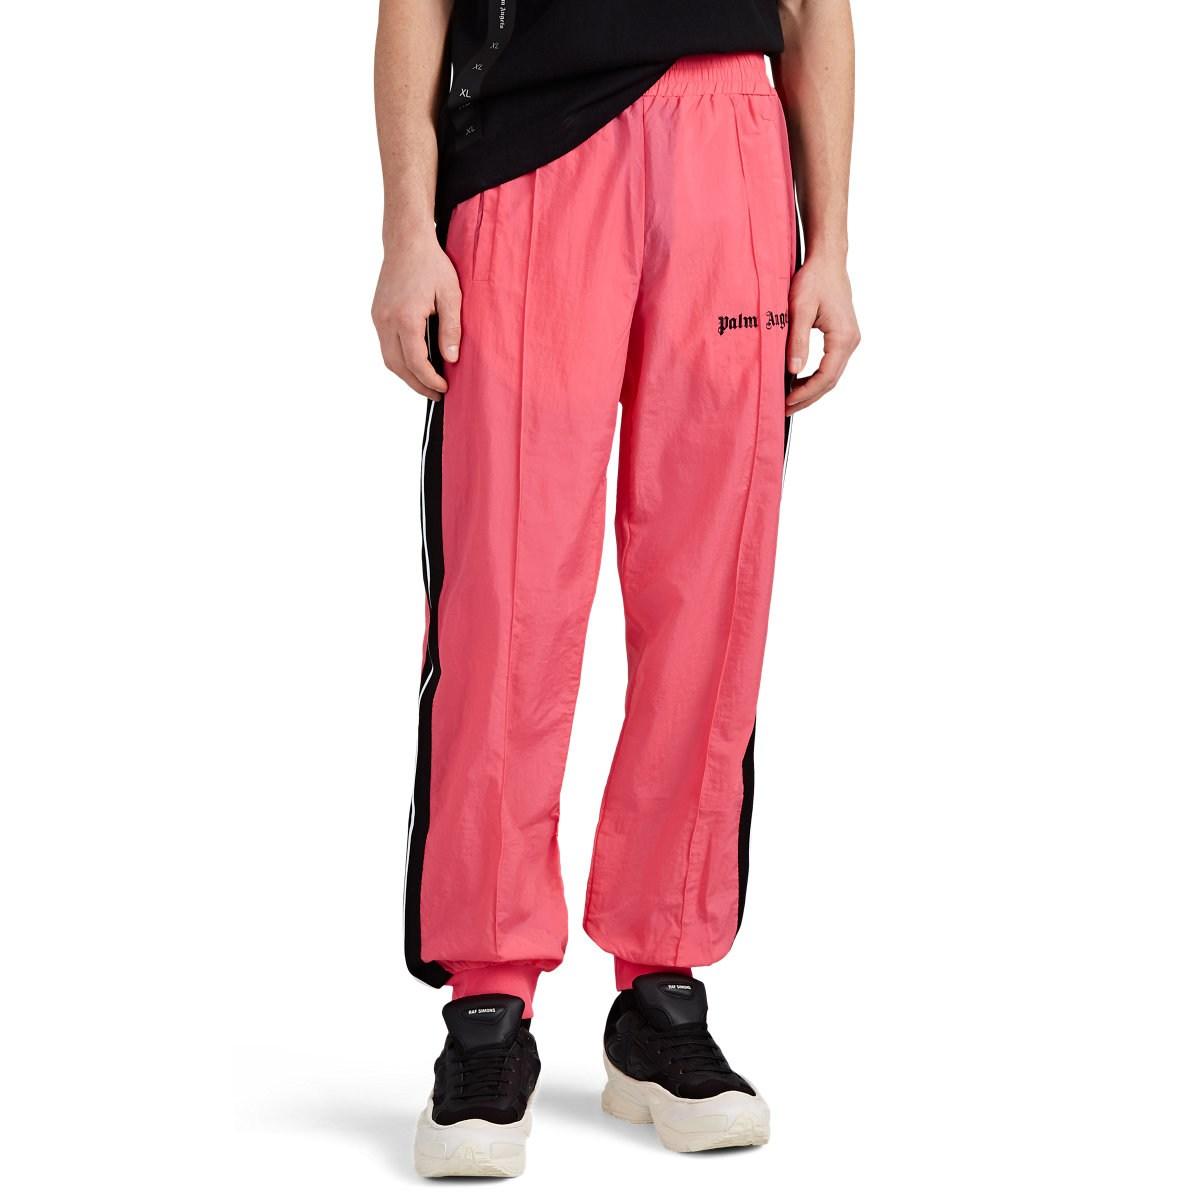 Palm Angels Synthetic Logo Track Pants in Pink for Men - Lyst